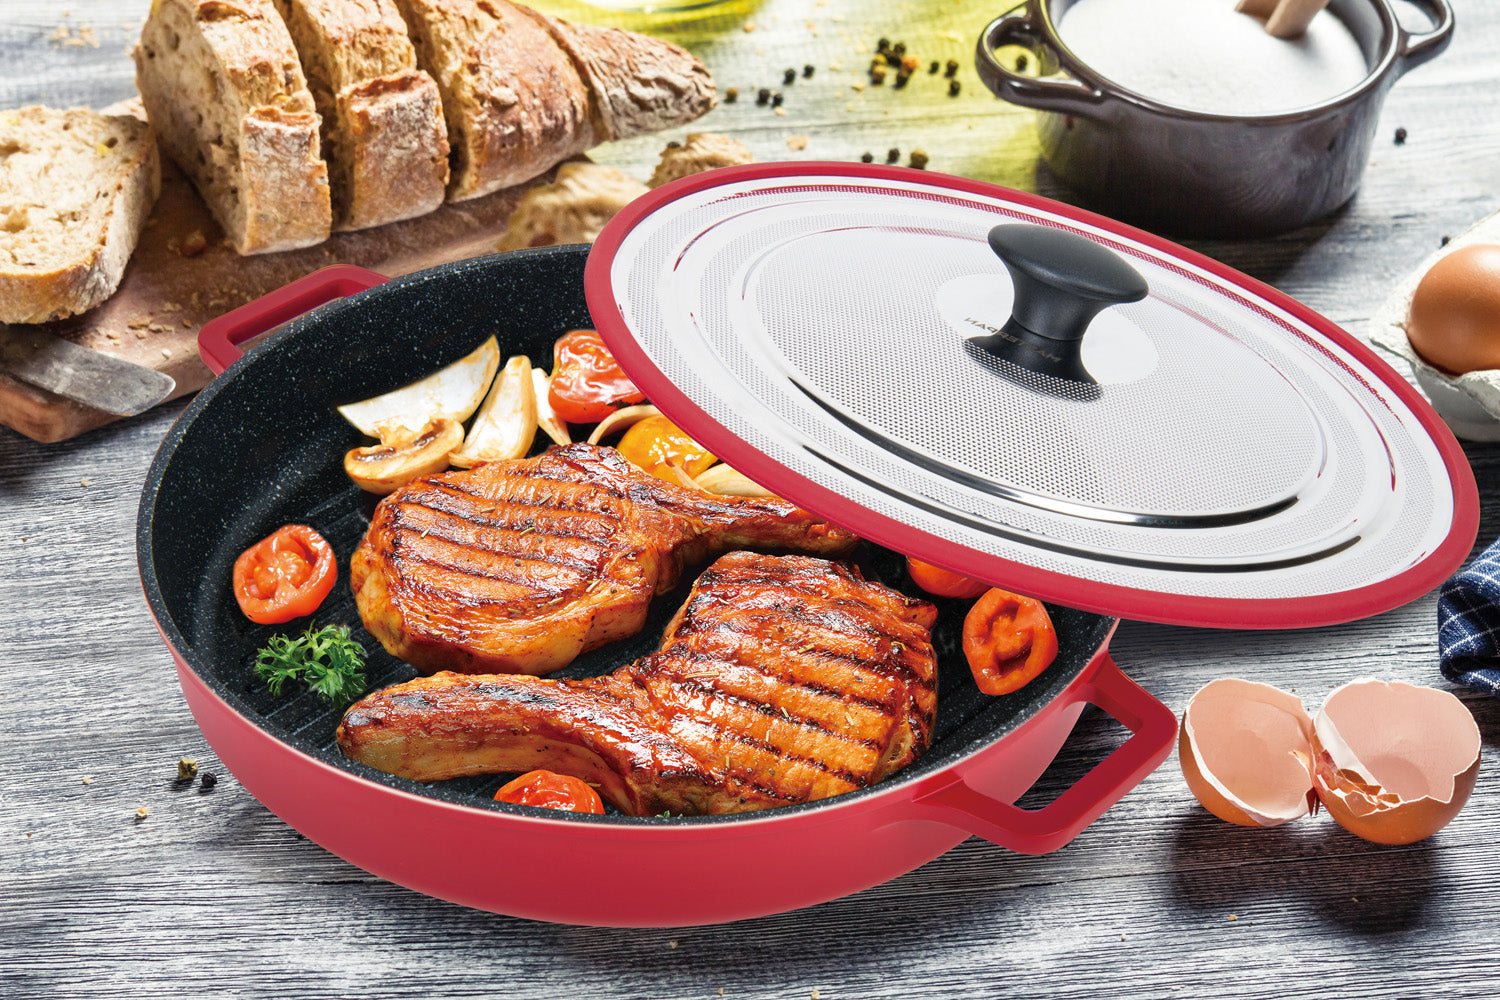 MasterPan Non-Stick Grill Pan with Folding Wooden Handle, 8, Black and  Brown